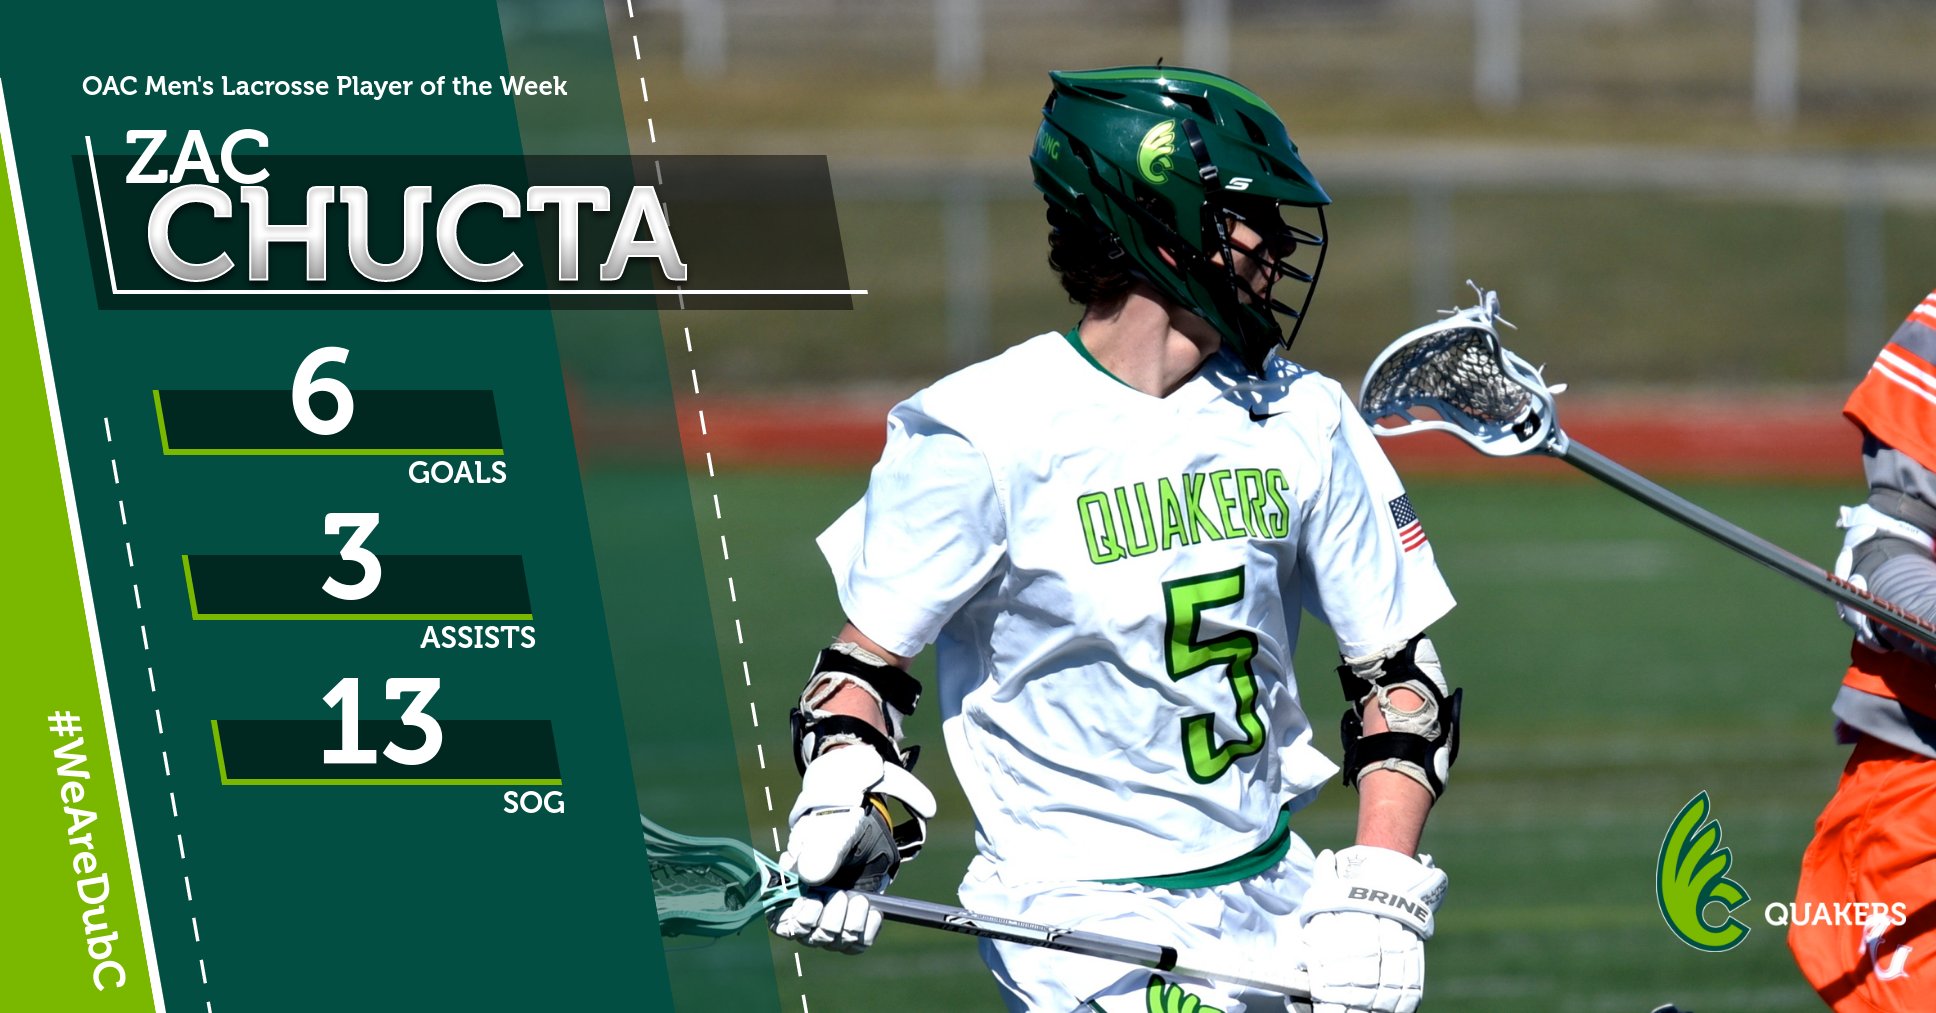 Zac Chucta Named OAC Men's Lacrosse Player of the Week